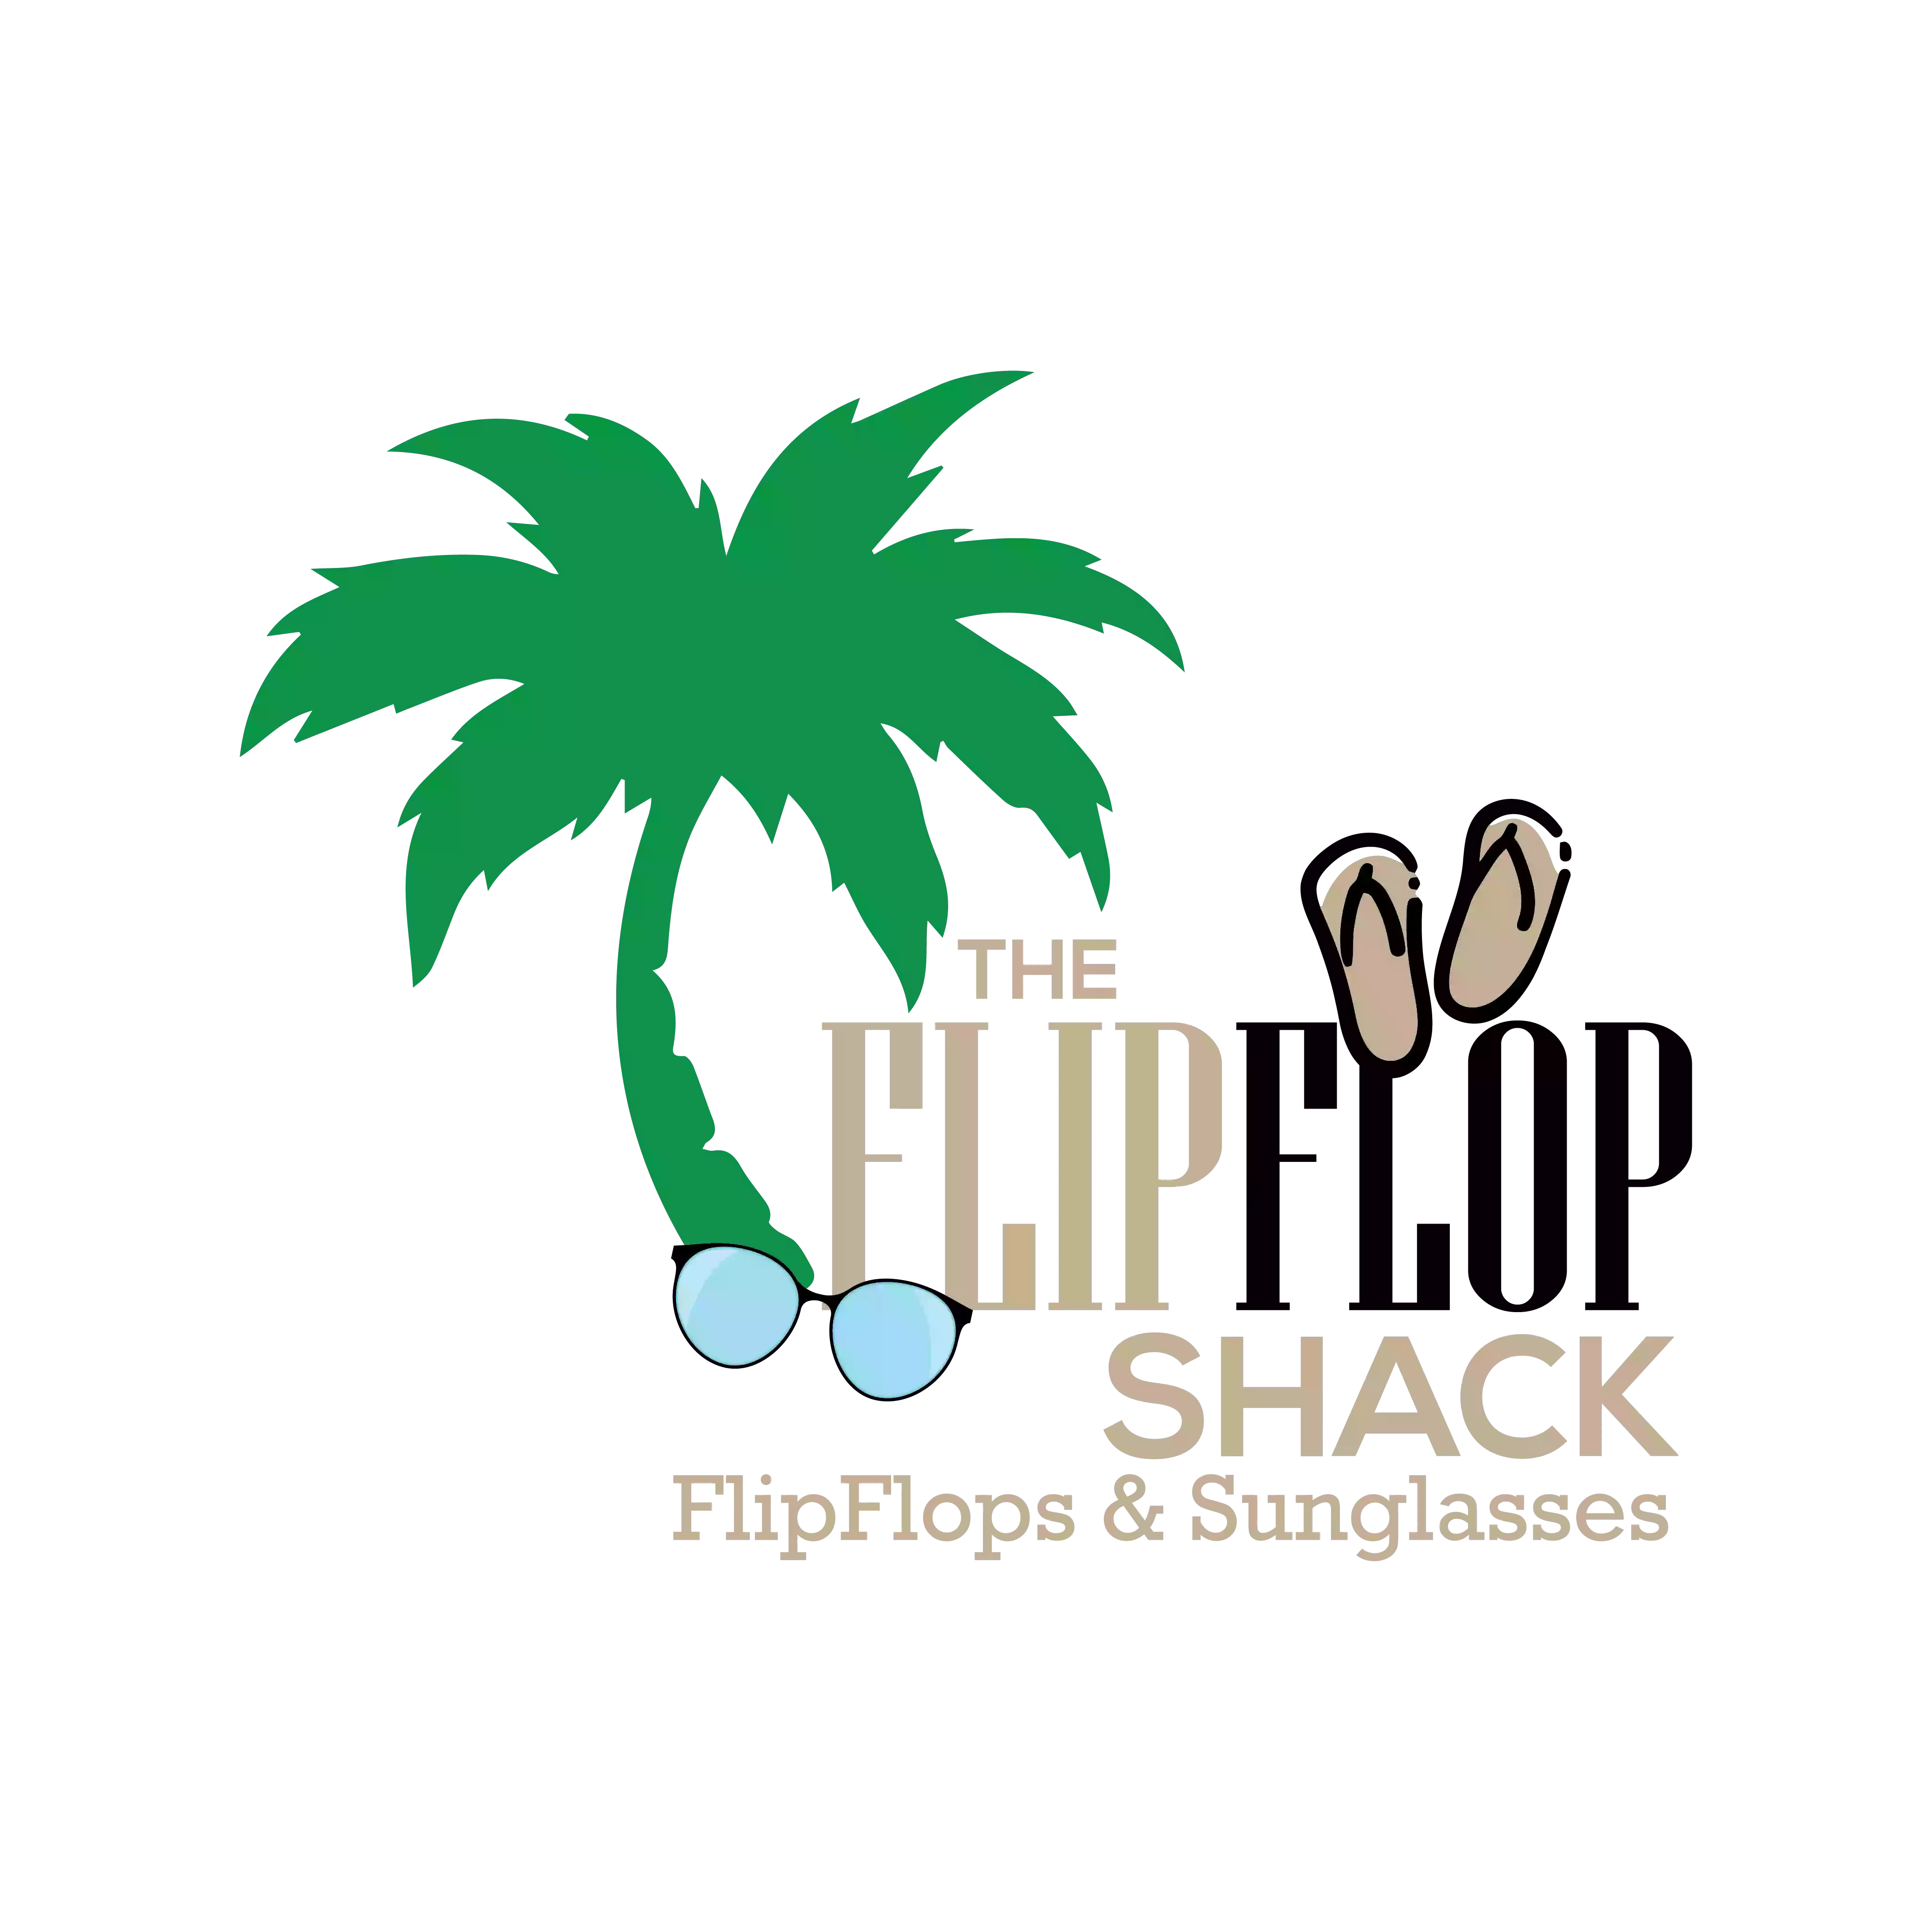 The FlipFlop Shack